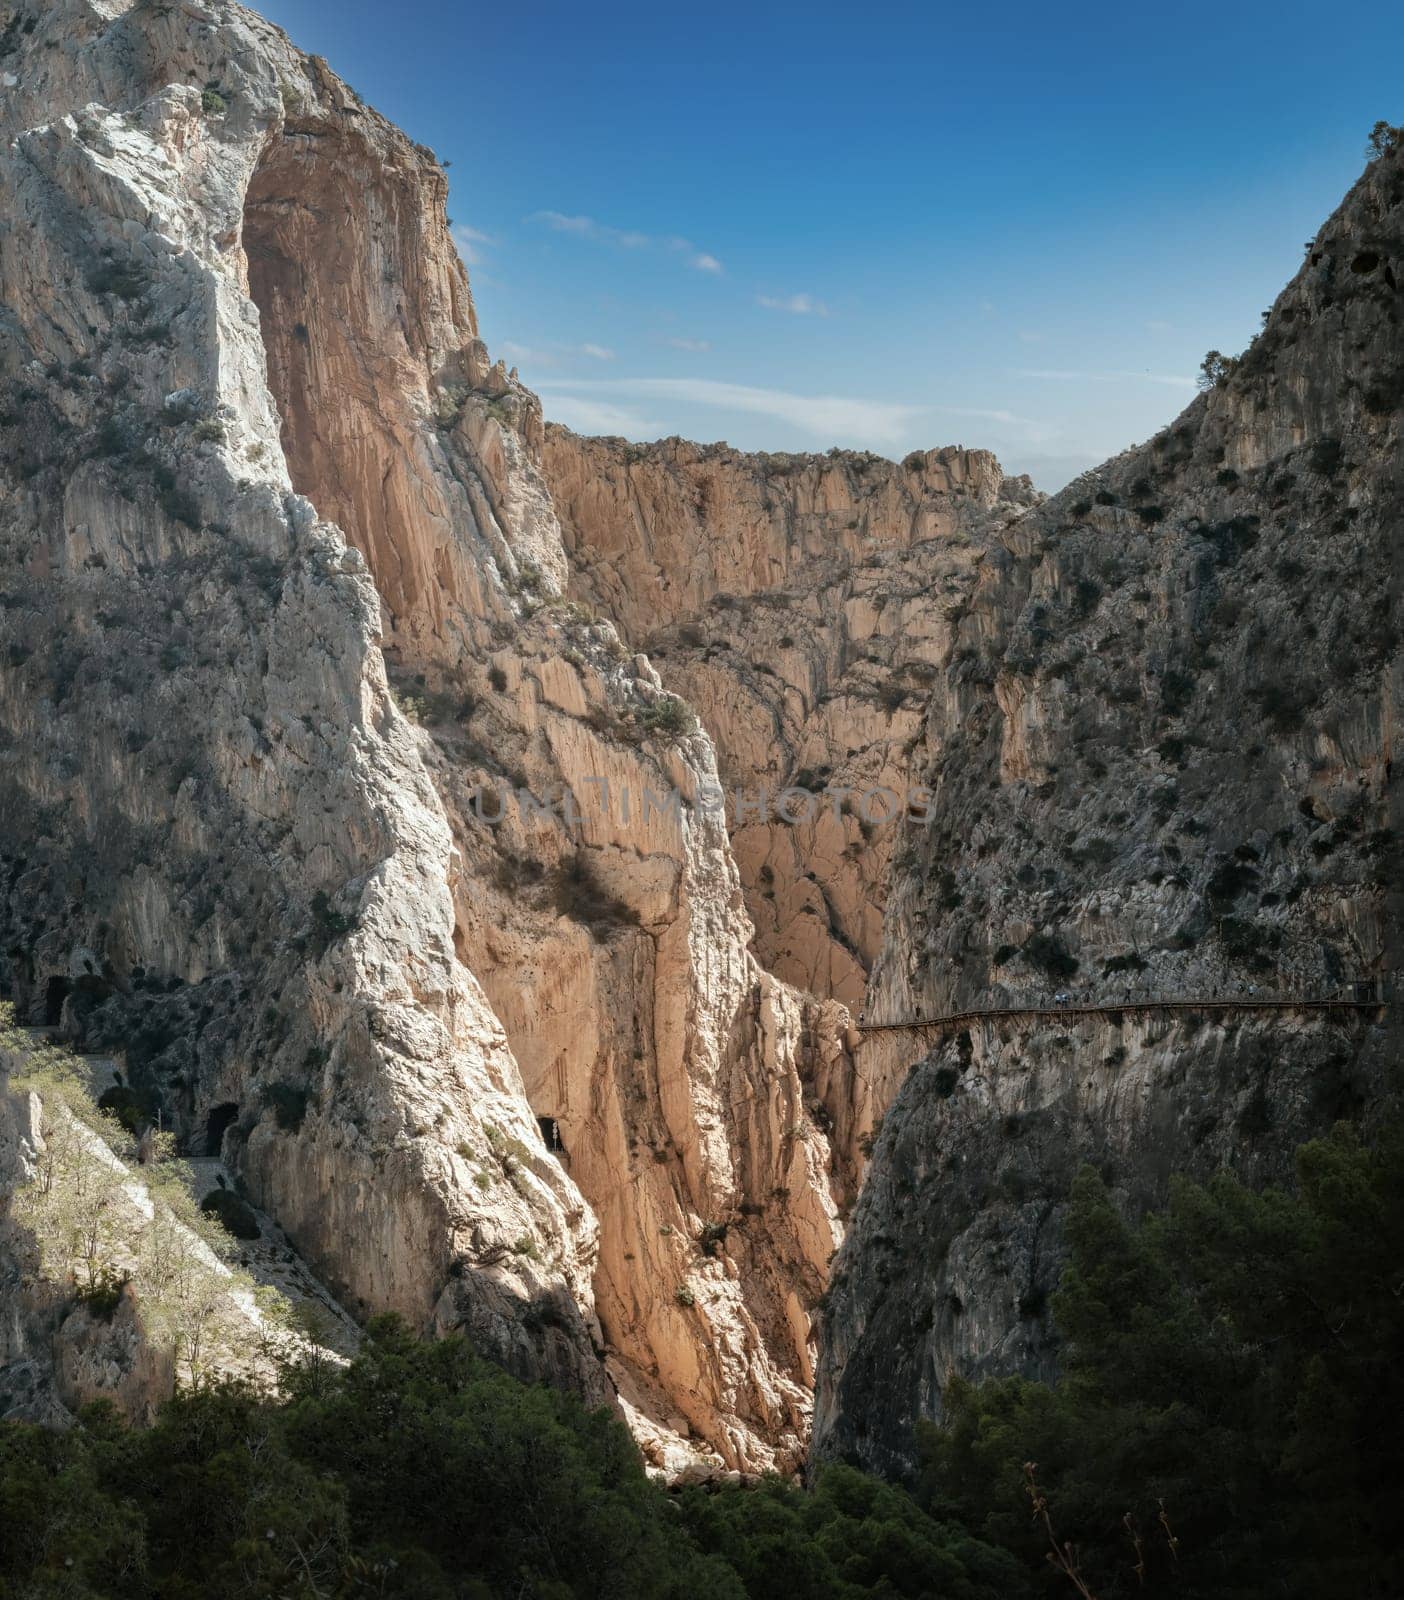 Thrilling Caminito del Rey Pathway with Tourists and Train Track by FerradalFCG